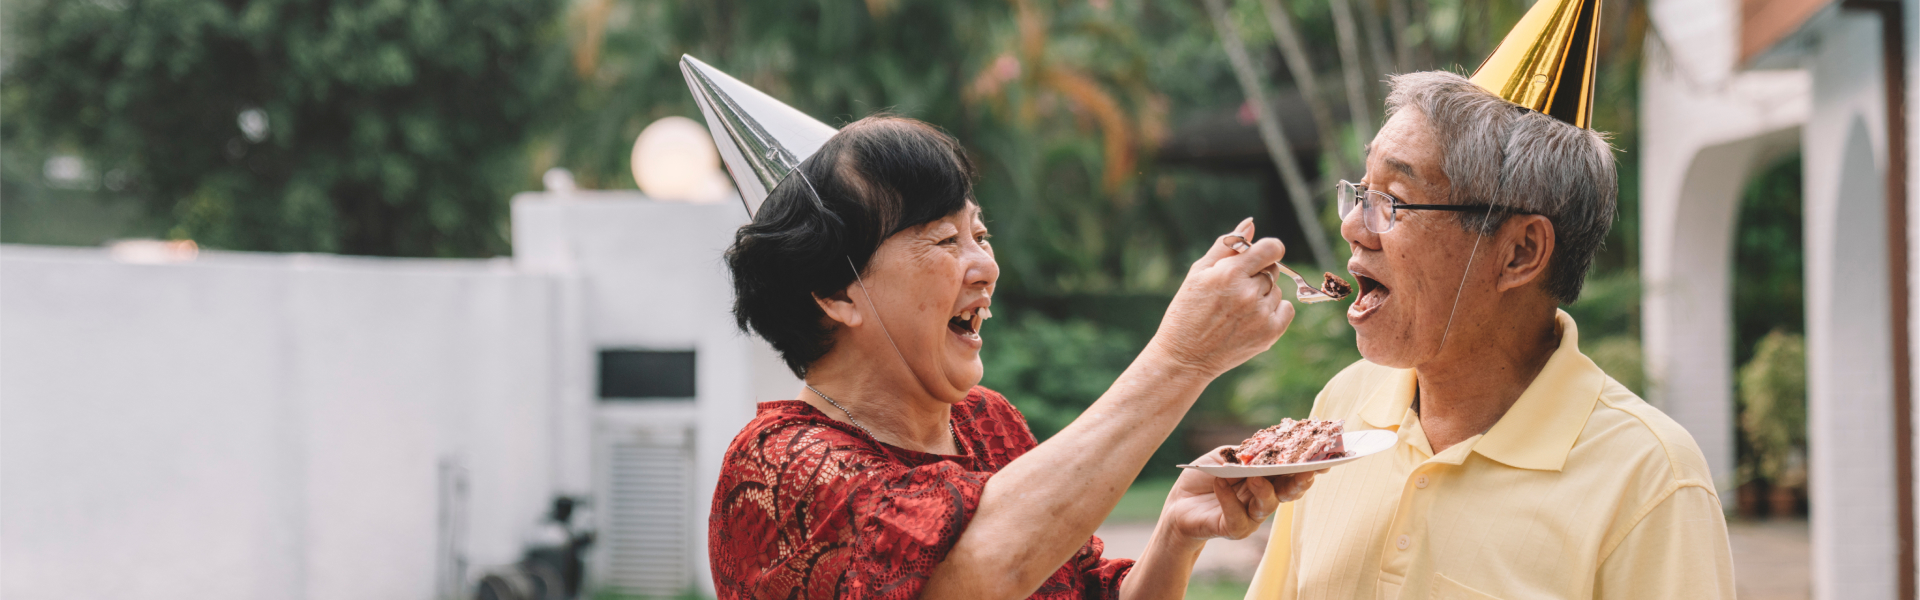 Mature, retirement age couple celebrating birthday with party hats on. The lady is laughing and feeding her husband cake.	